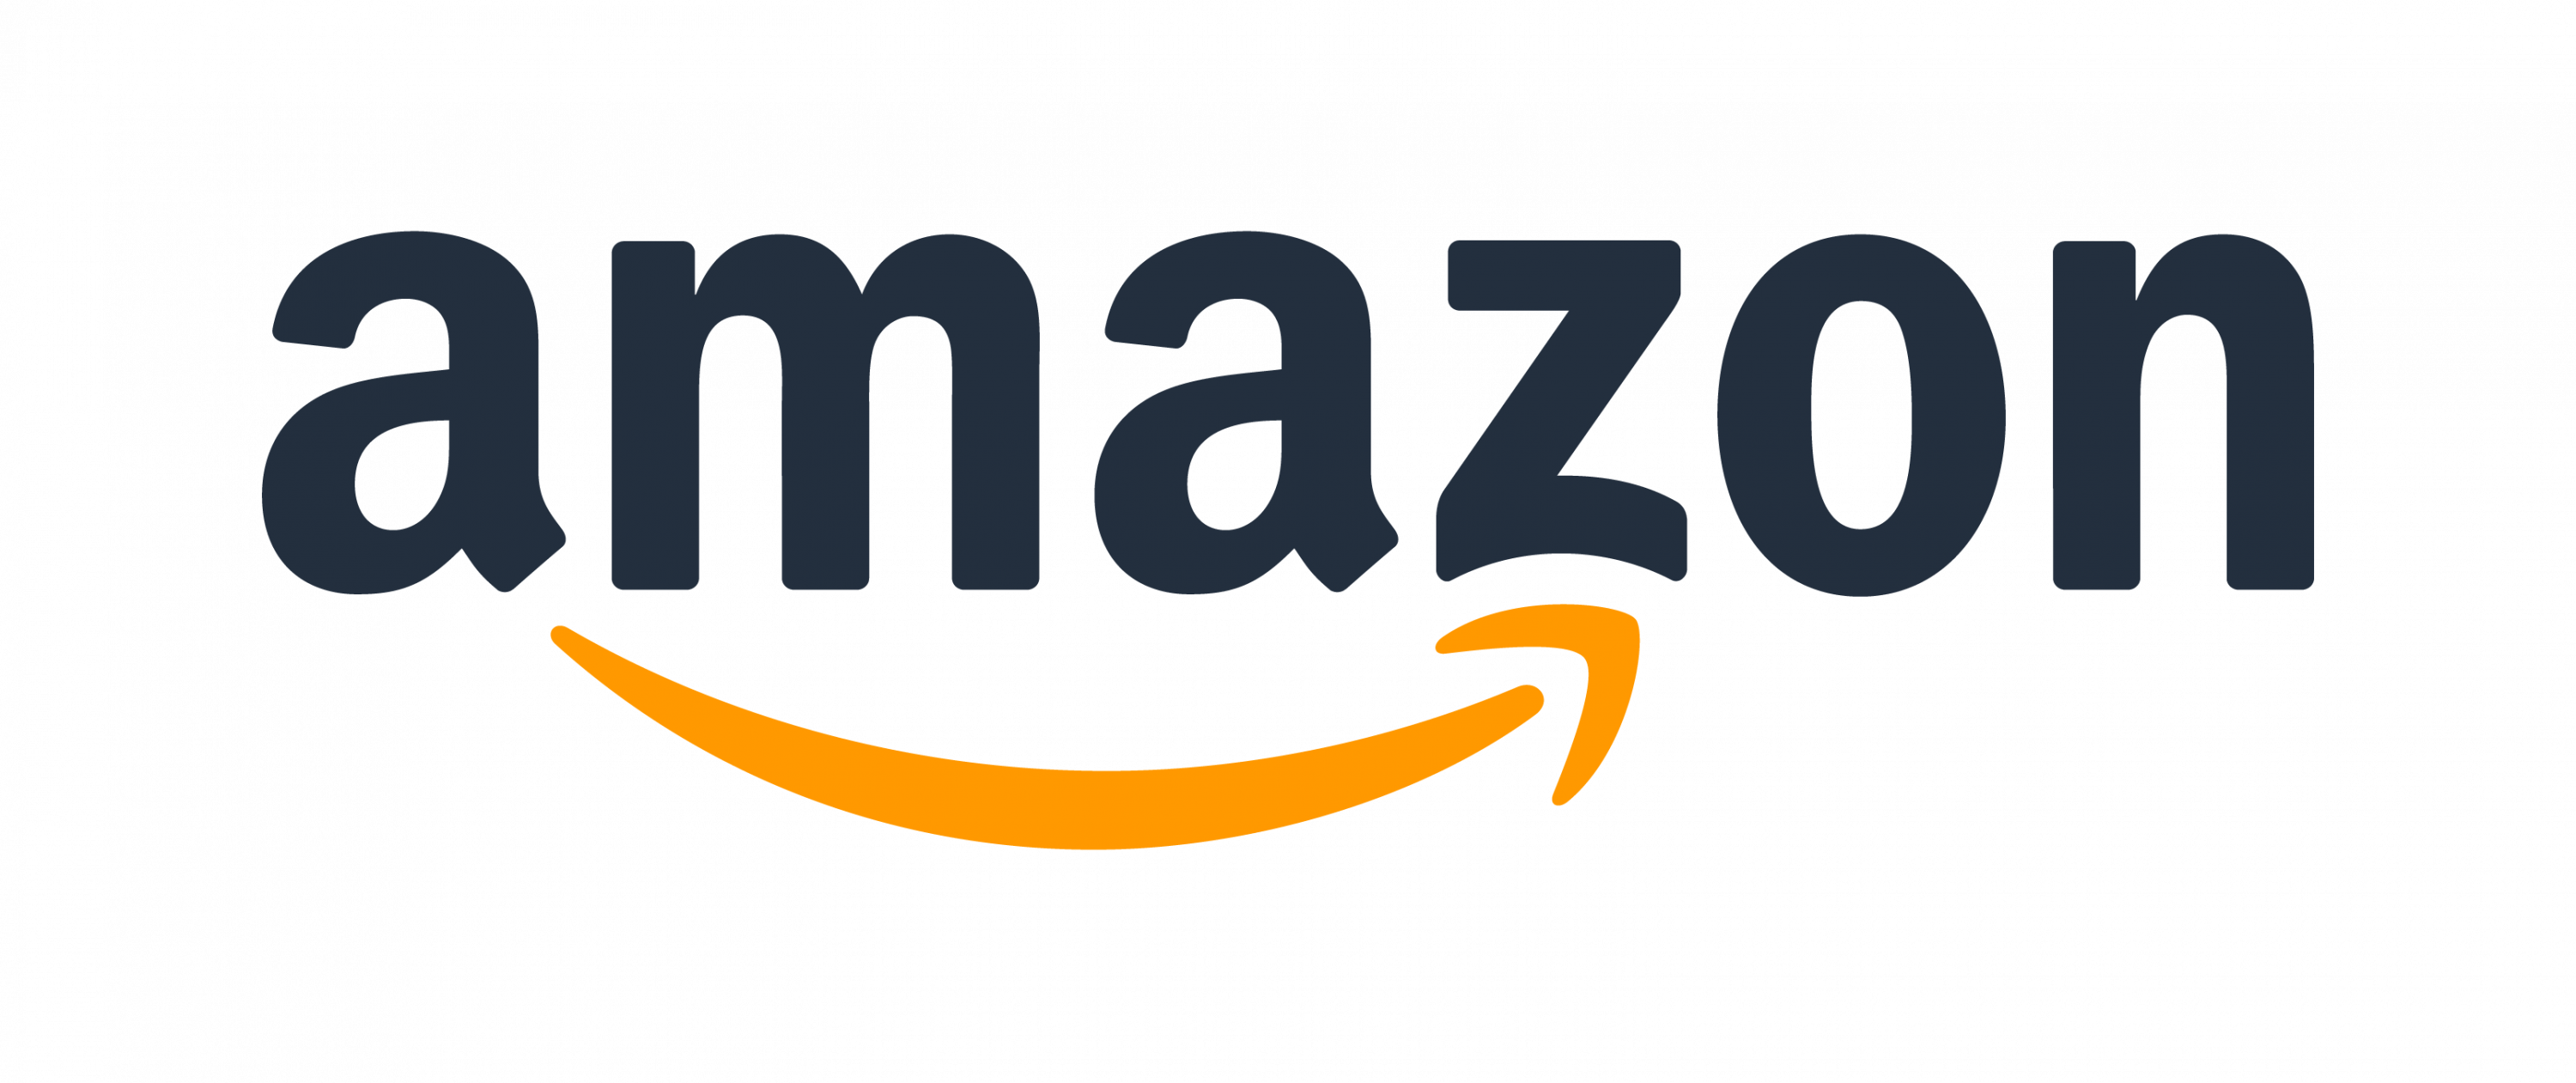 PFLUGERVILLE COMMUNITY DEVELOPMENT CORP. PARTNERS WITH WORKFORCE SOLUTIONS CAPITAL AREA TO HOST AMAZON HIRING INFORMATION WEBINAR Main Photo